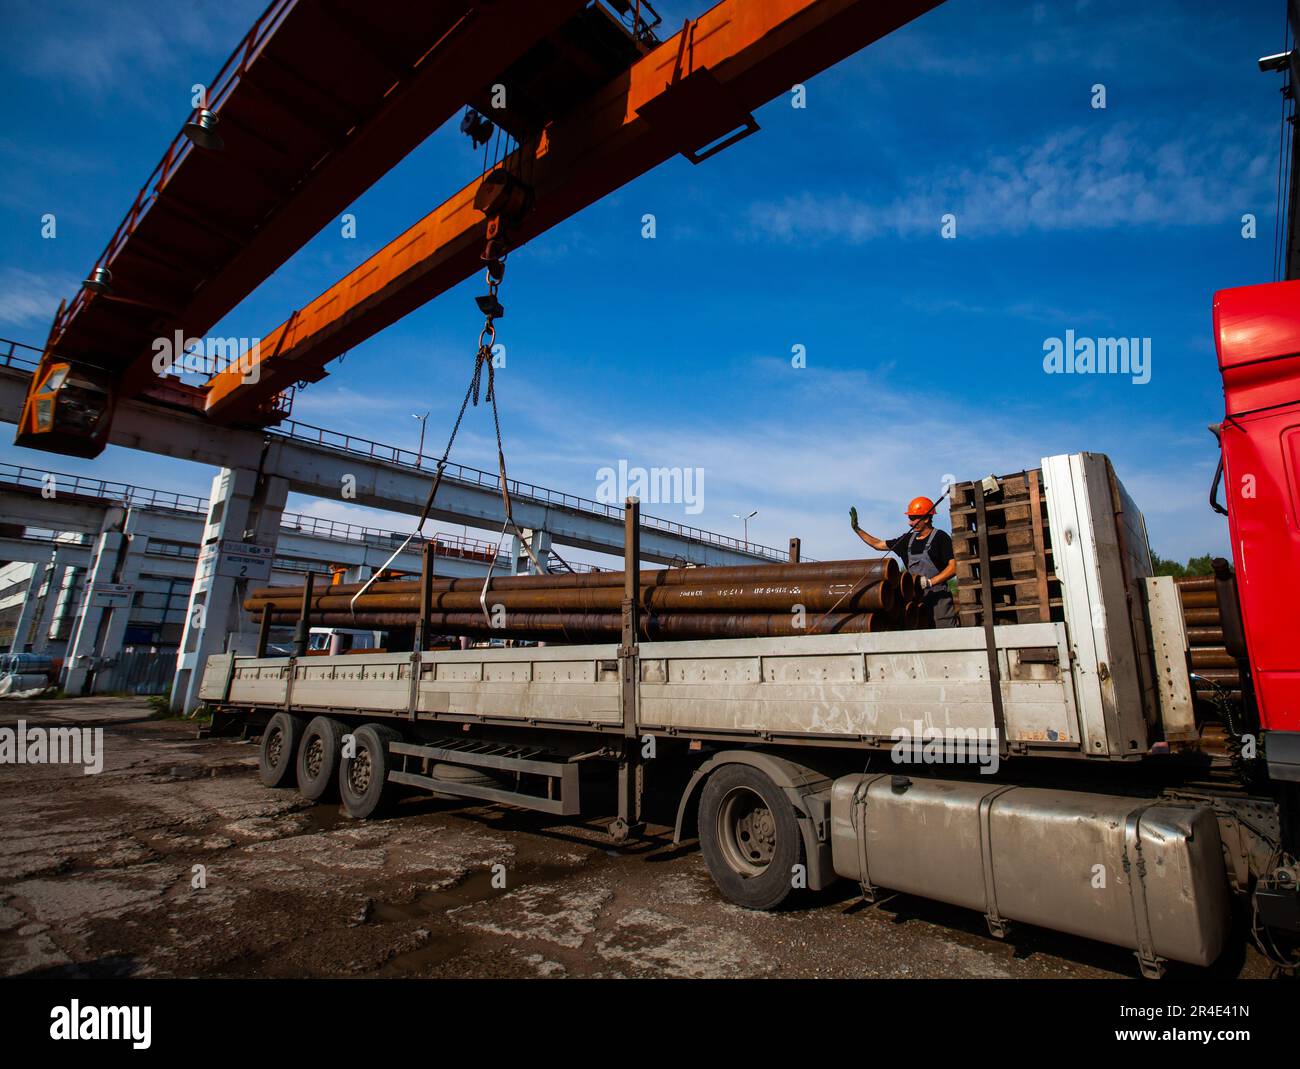 Podolsk, Moscow province - August 02, 2021: Pipes warehouse. Worker load tubes on truck with overhead crane. Stock Photo